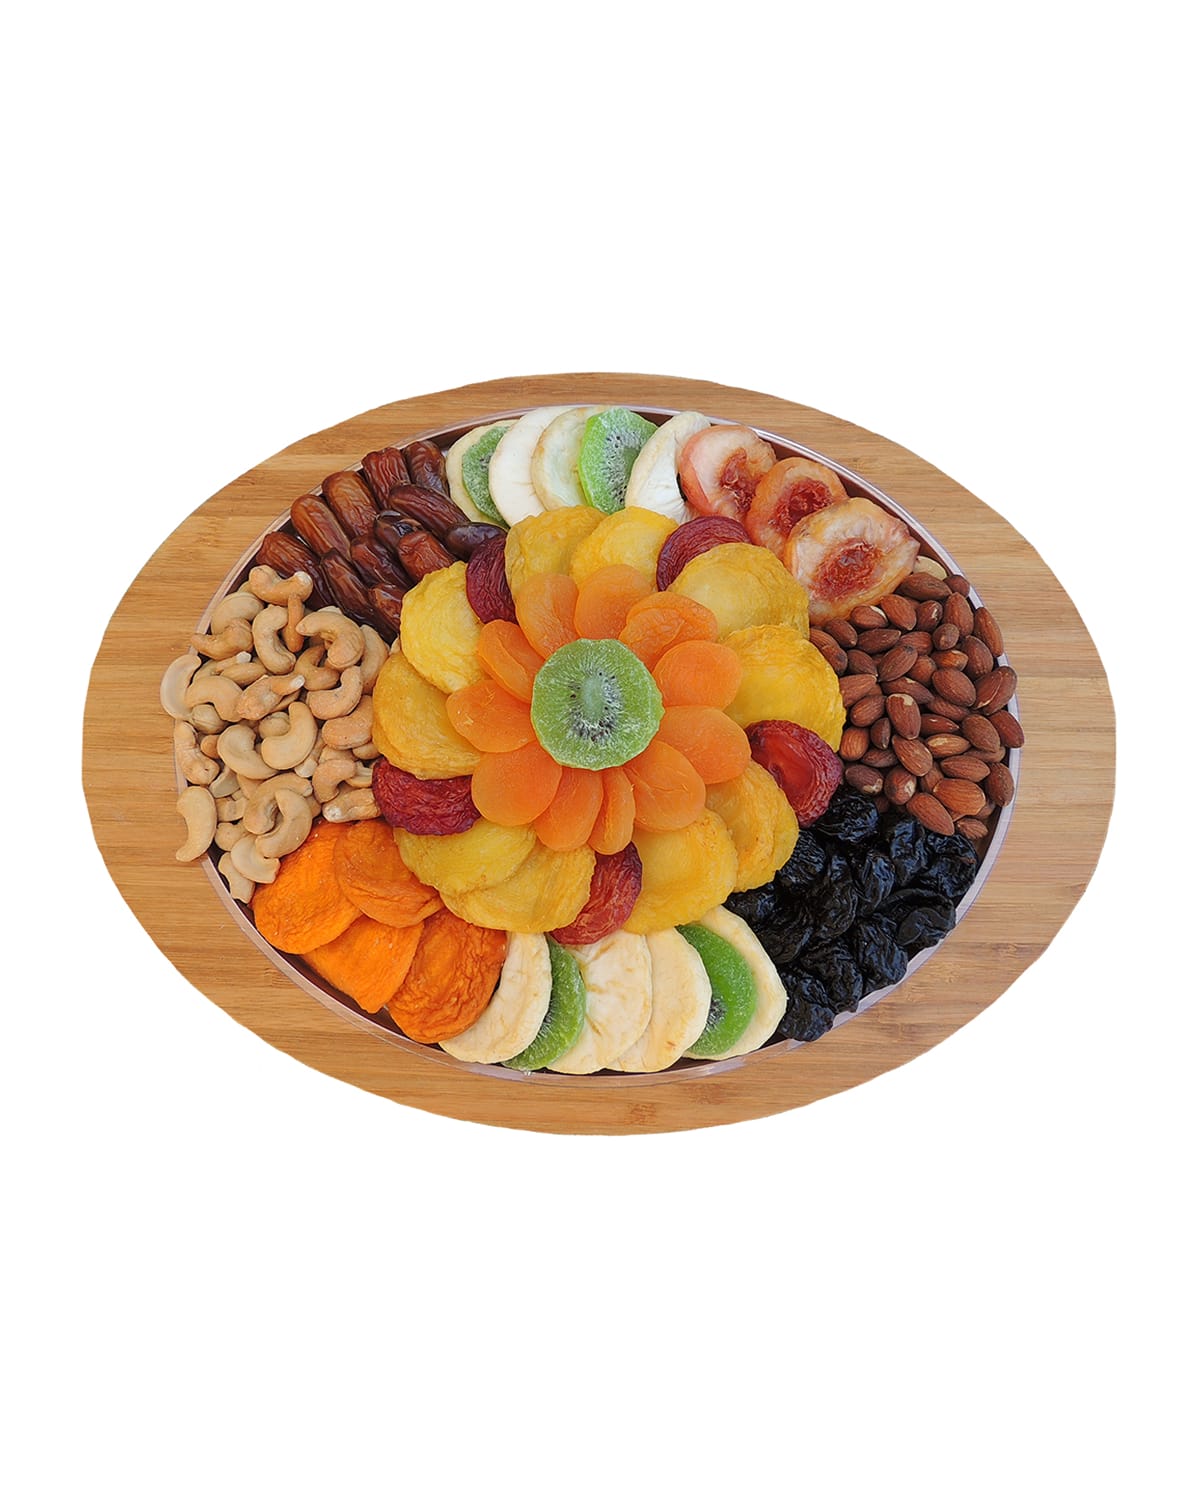 Oval Reusable Serving Tray with Fruit